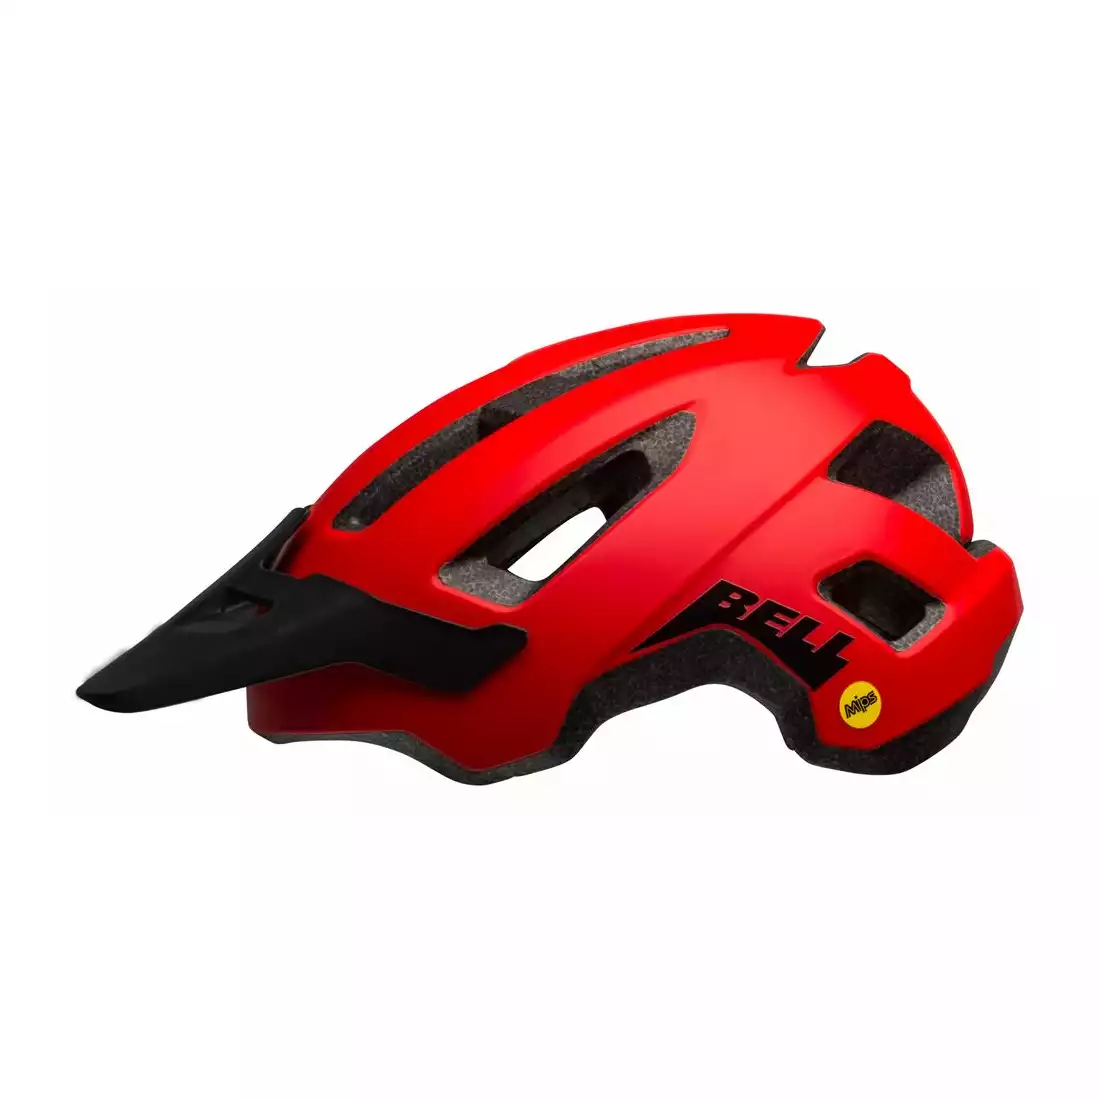 Kask rowerowy mtb BELL NOMAD INTEGRATED MIPS mate red black 